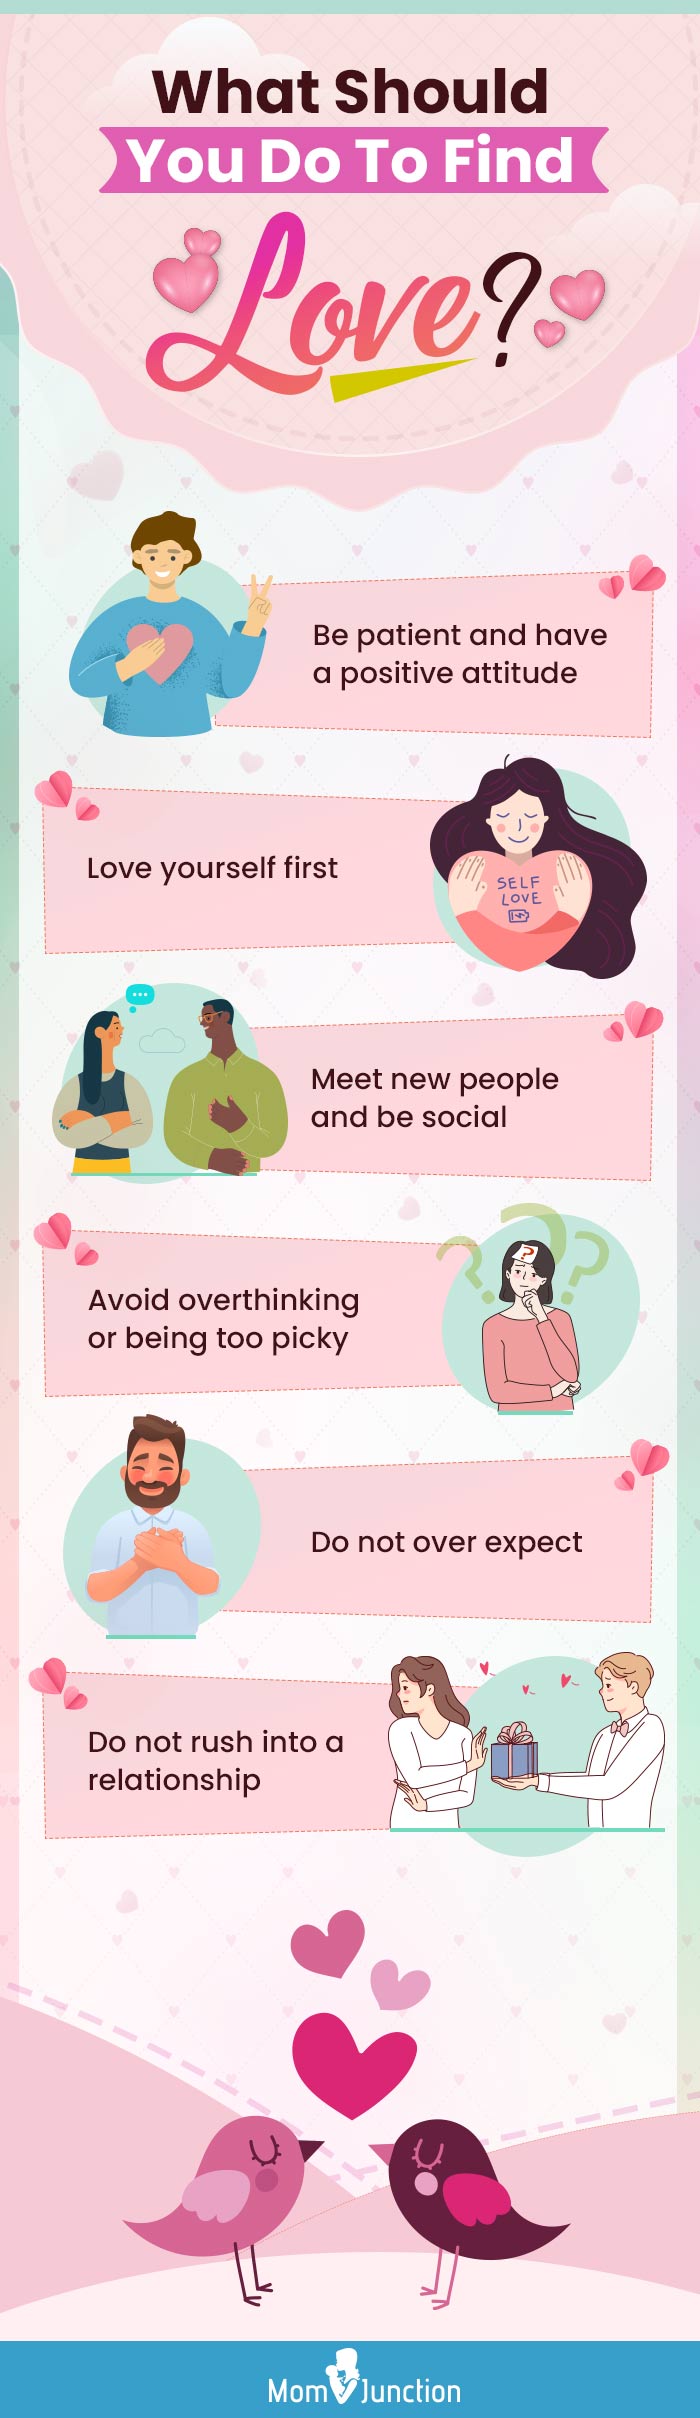 things to note when finding love (infographic)